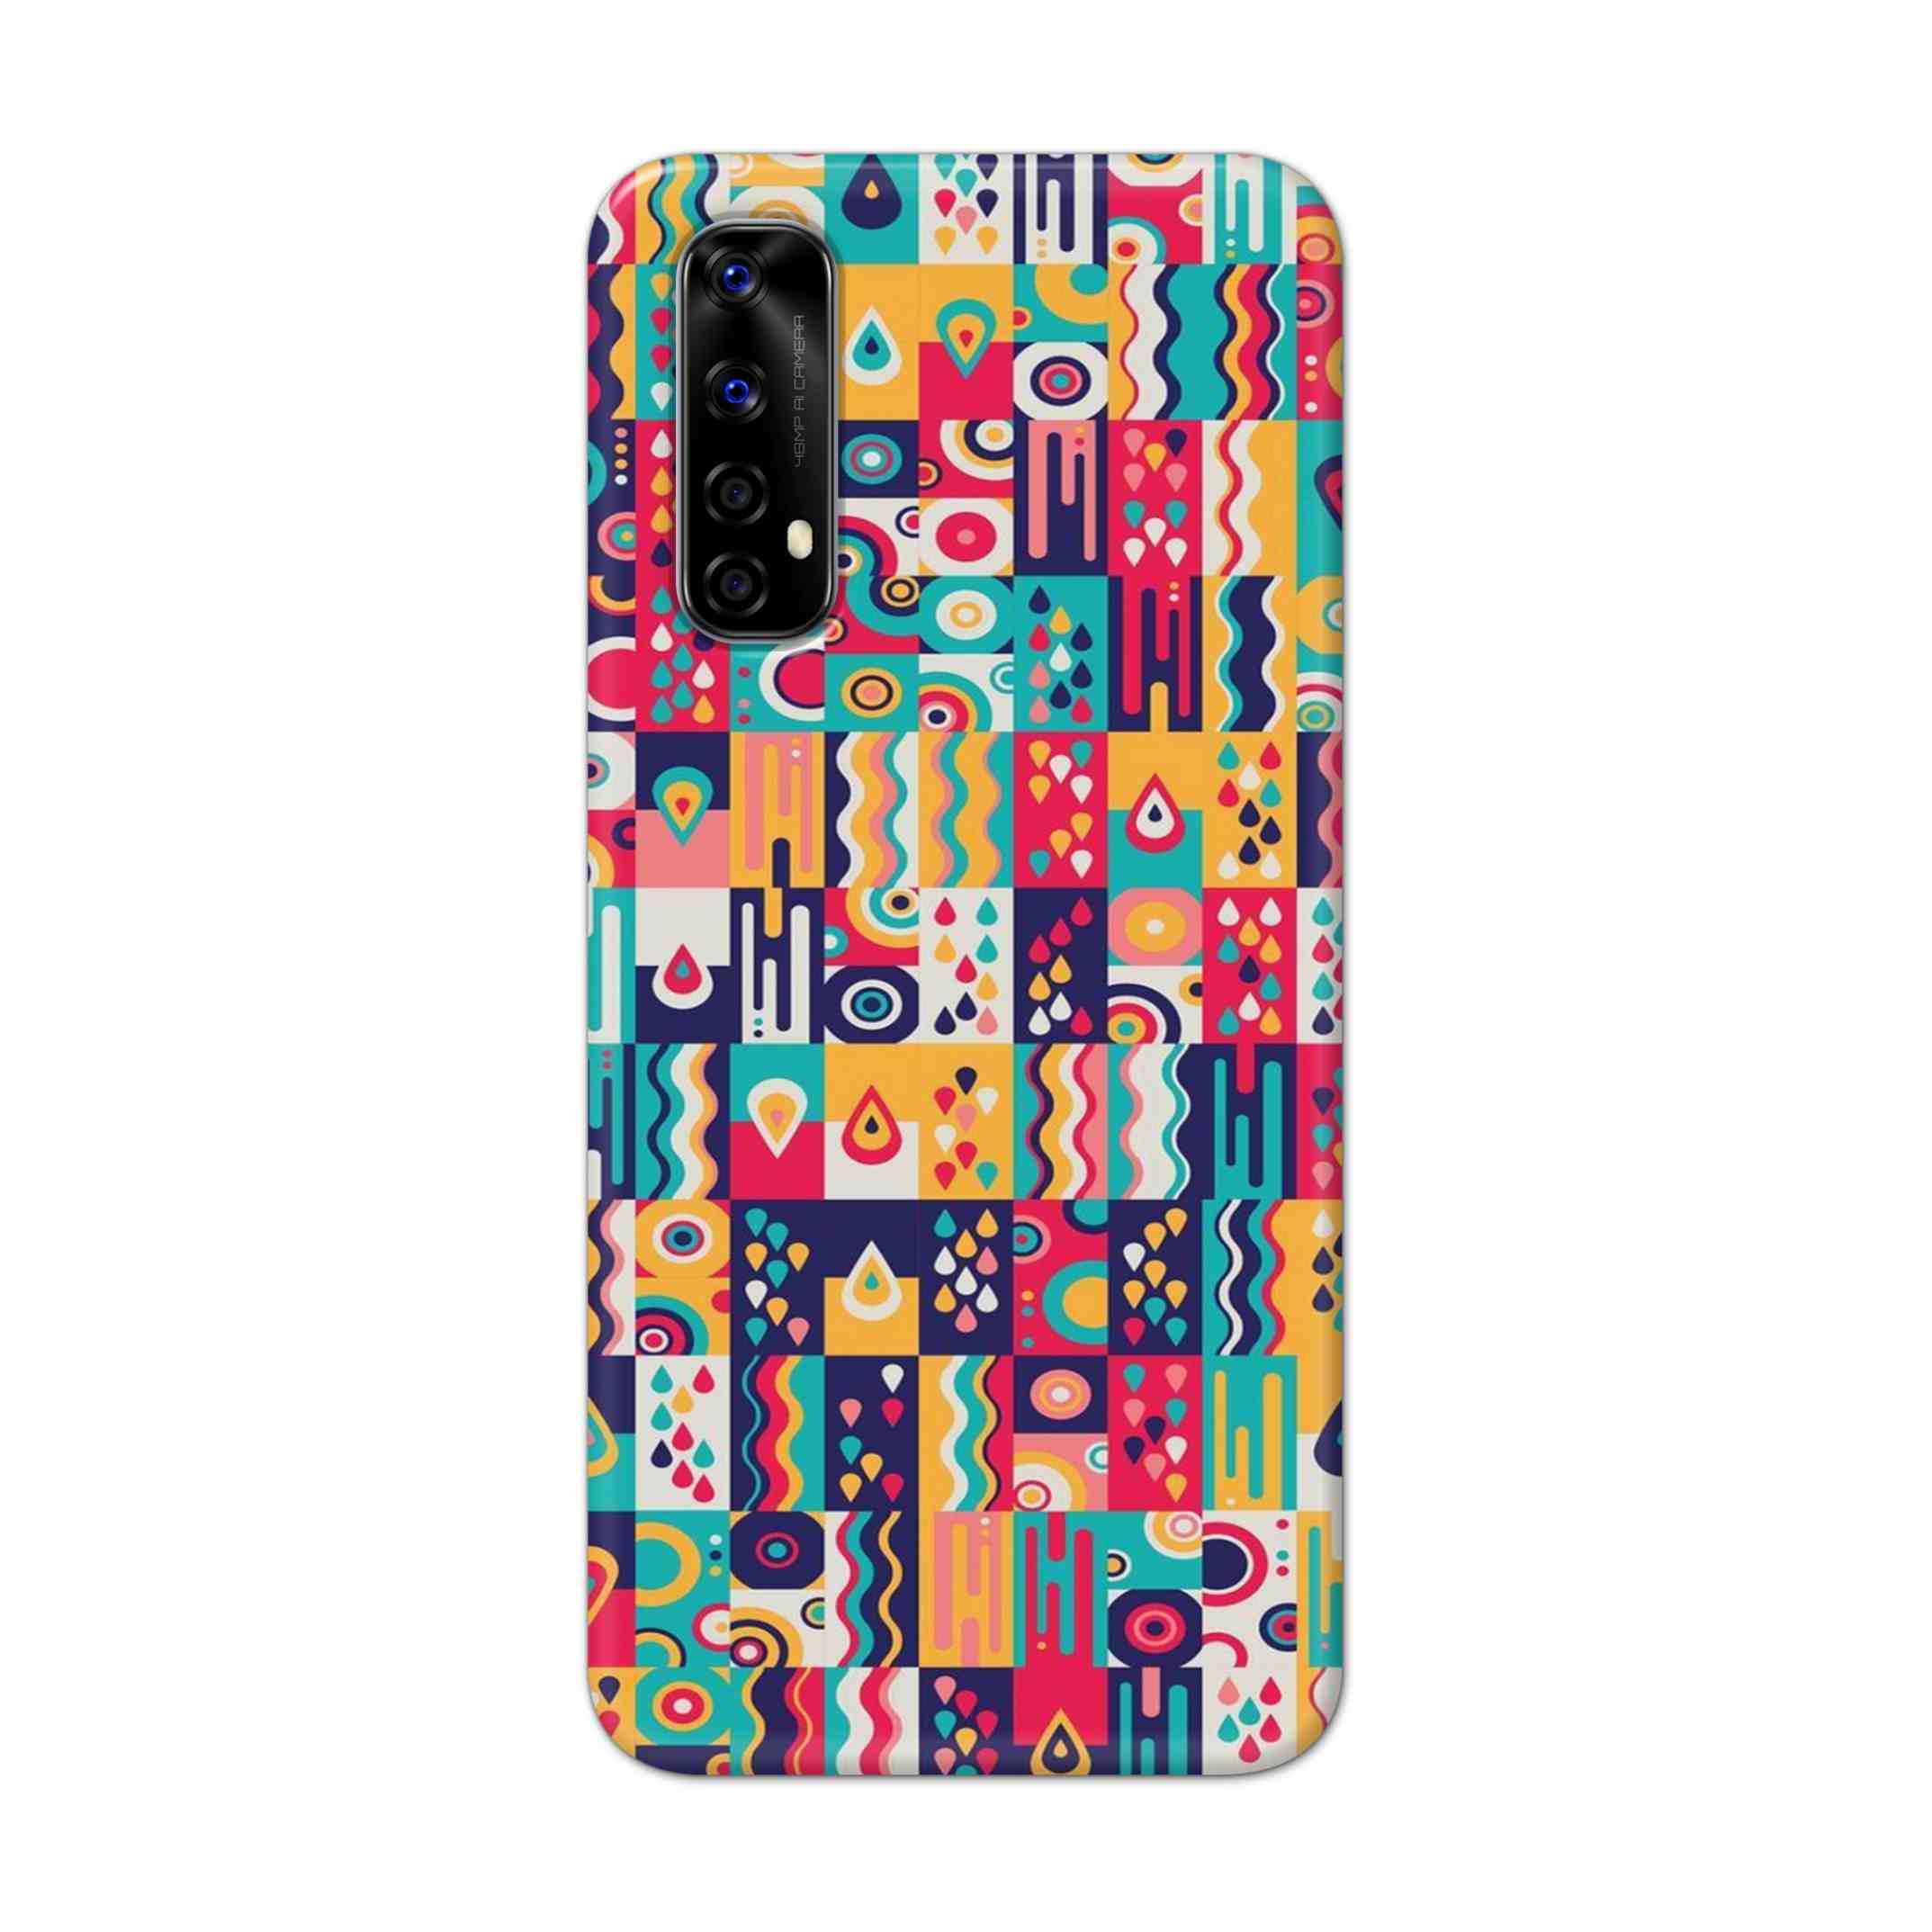 Buy Art Hard Back Mobile Phone Case Cover For Realme Narzo 20 Pro Online